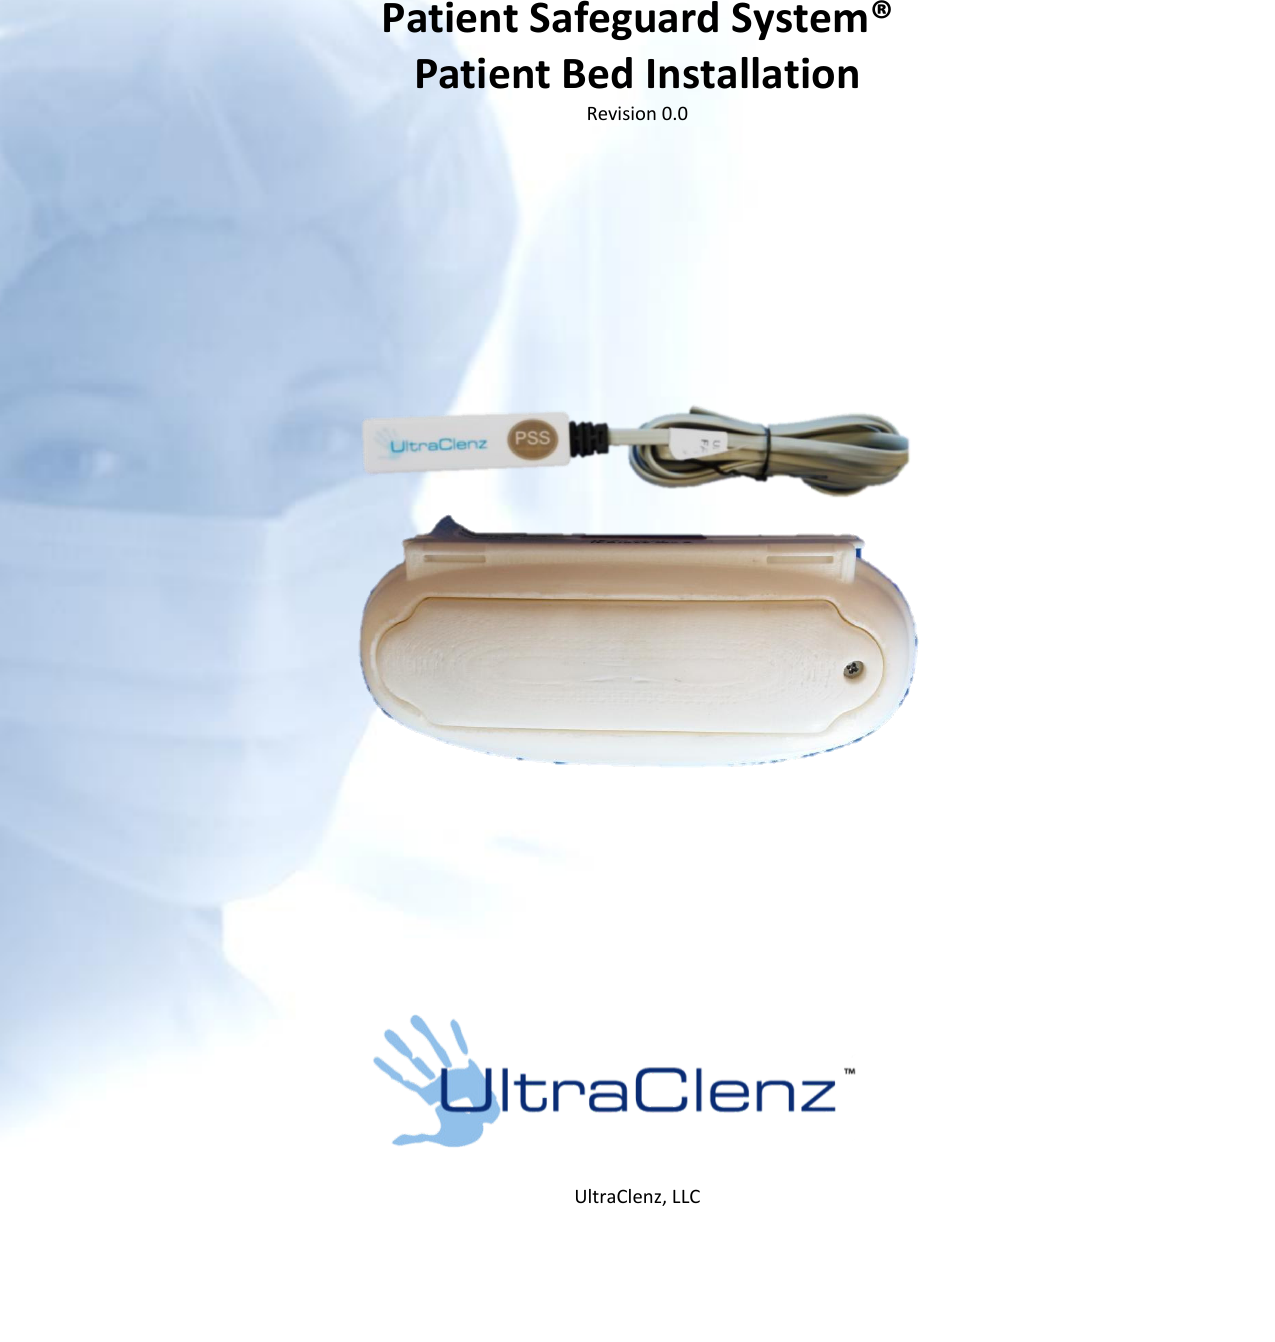      Patient Safeguard System® Patient Bed Installation Revision 0.0                                     UltraClenz, LLC 